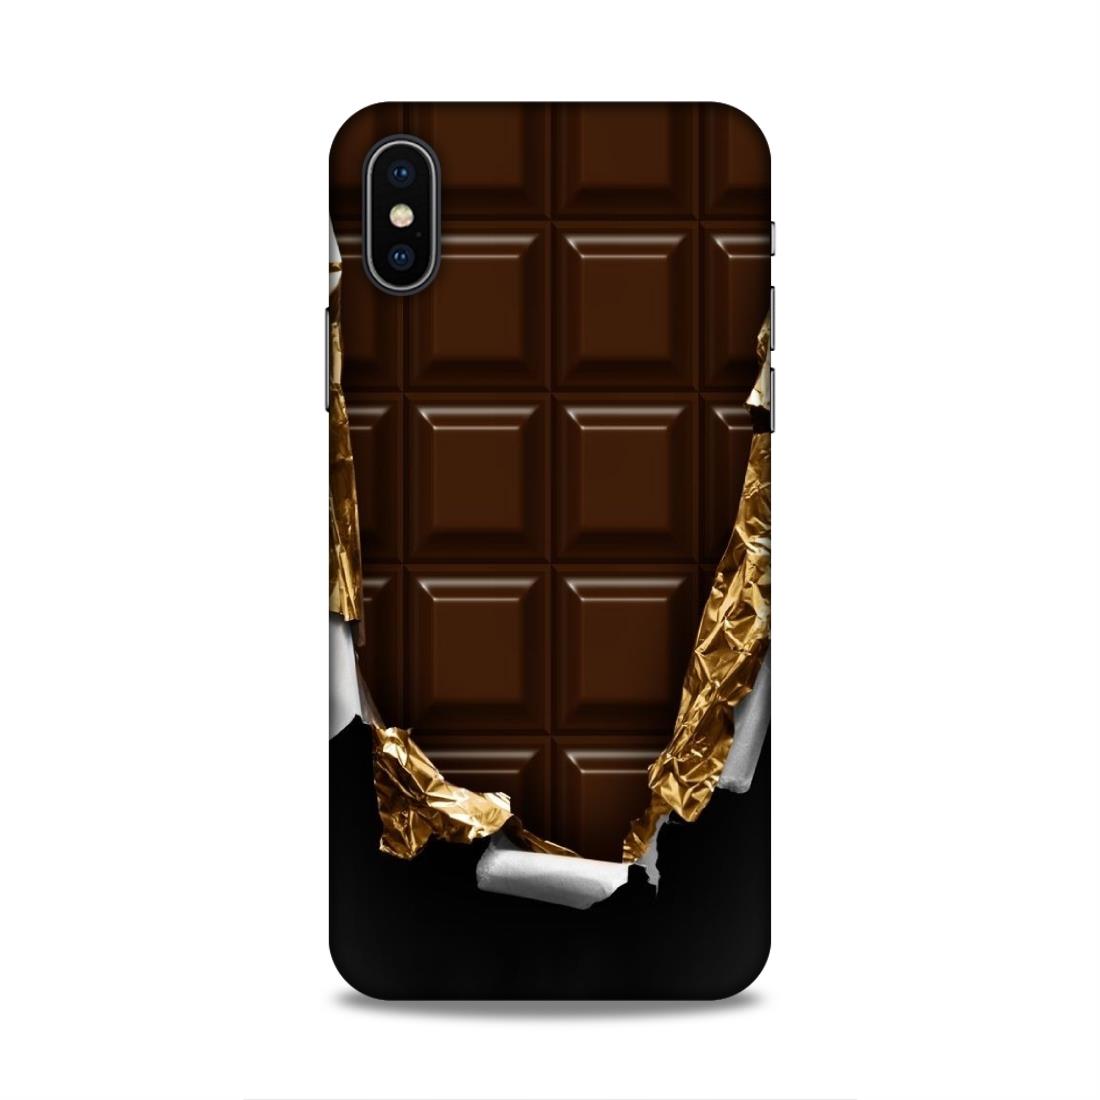 Chocolate Hard Back Case For Apple iPhone X/XS